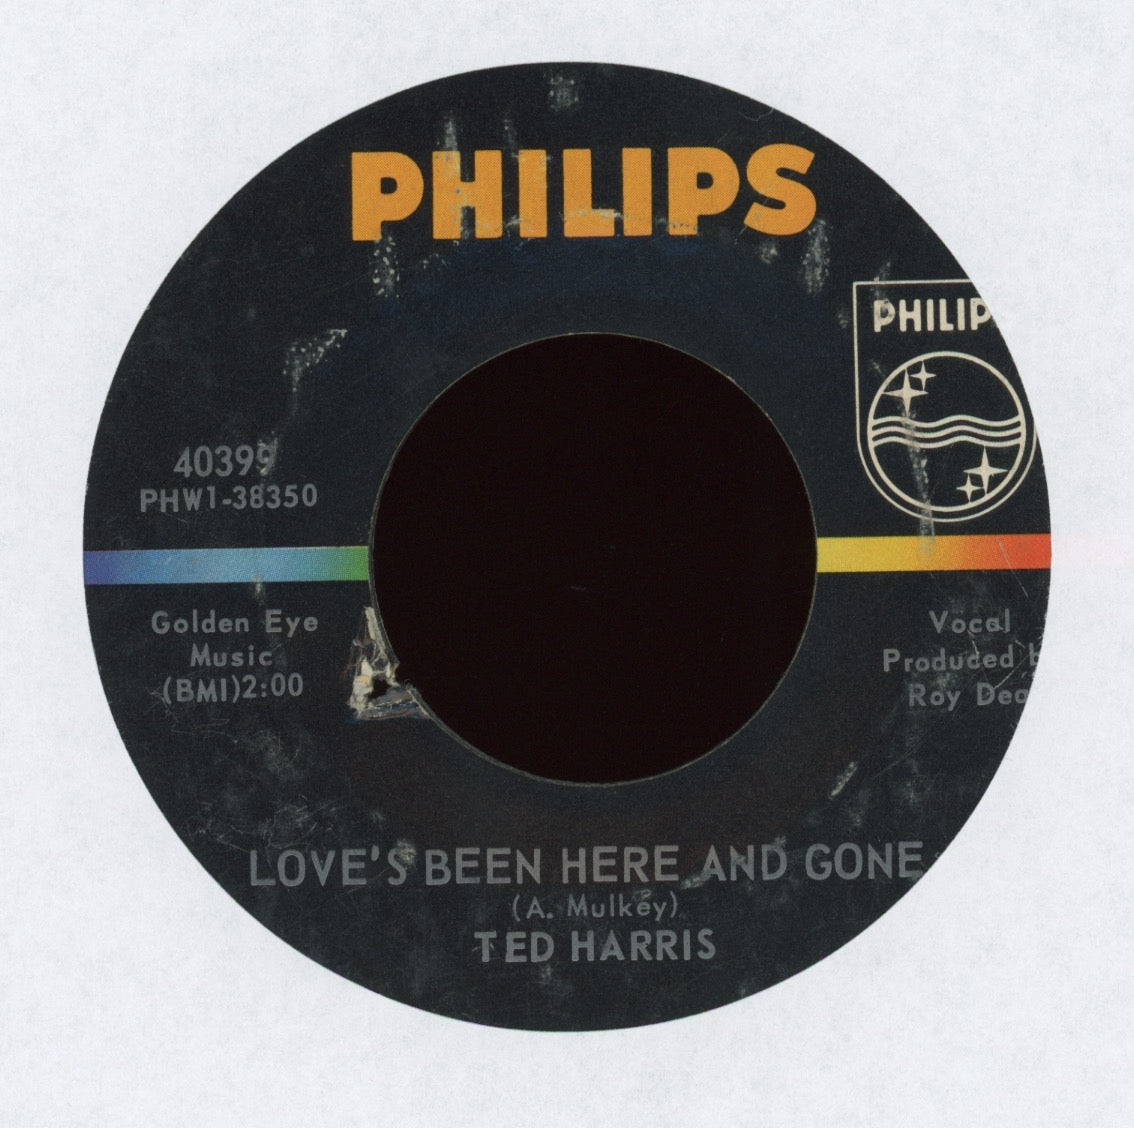 Ted Harris - Love's Been Here And Gone on Philips